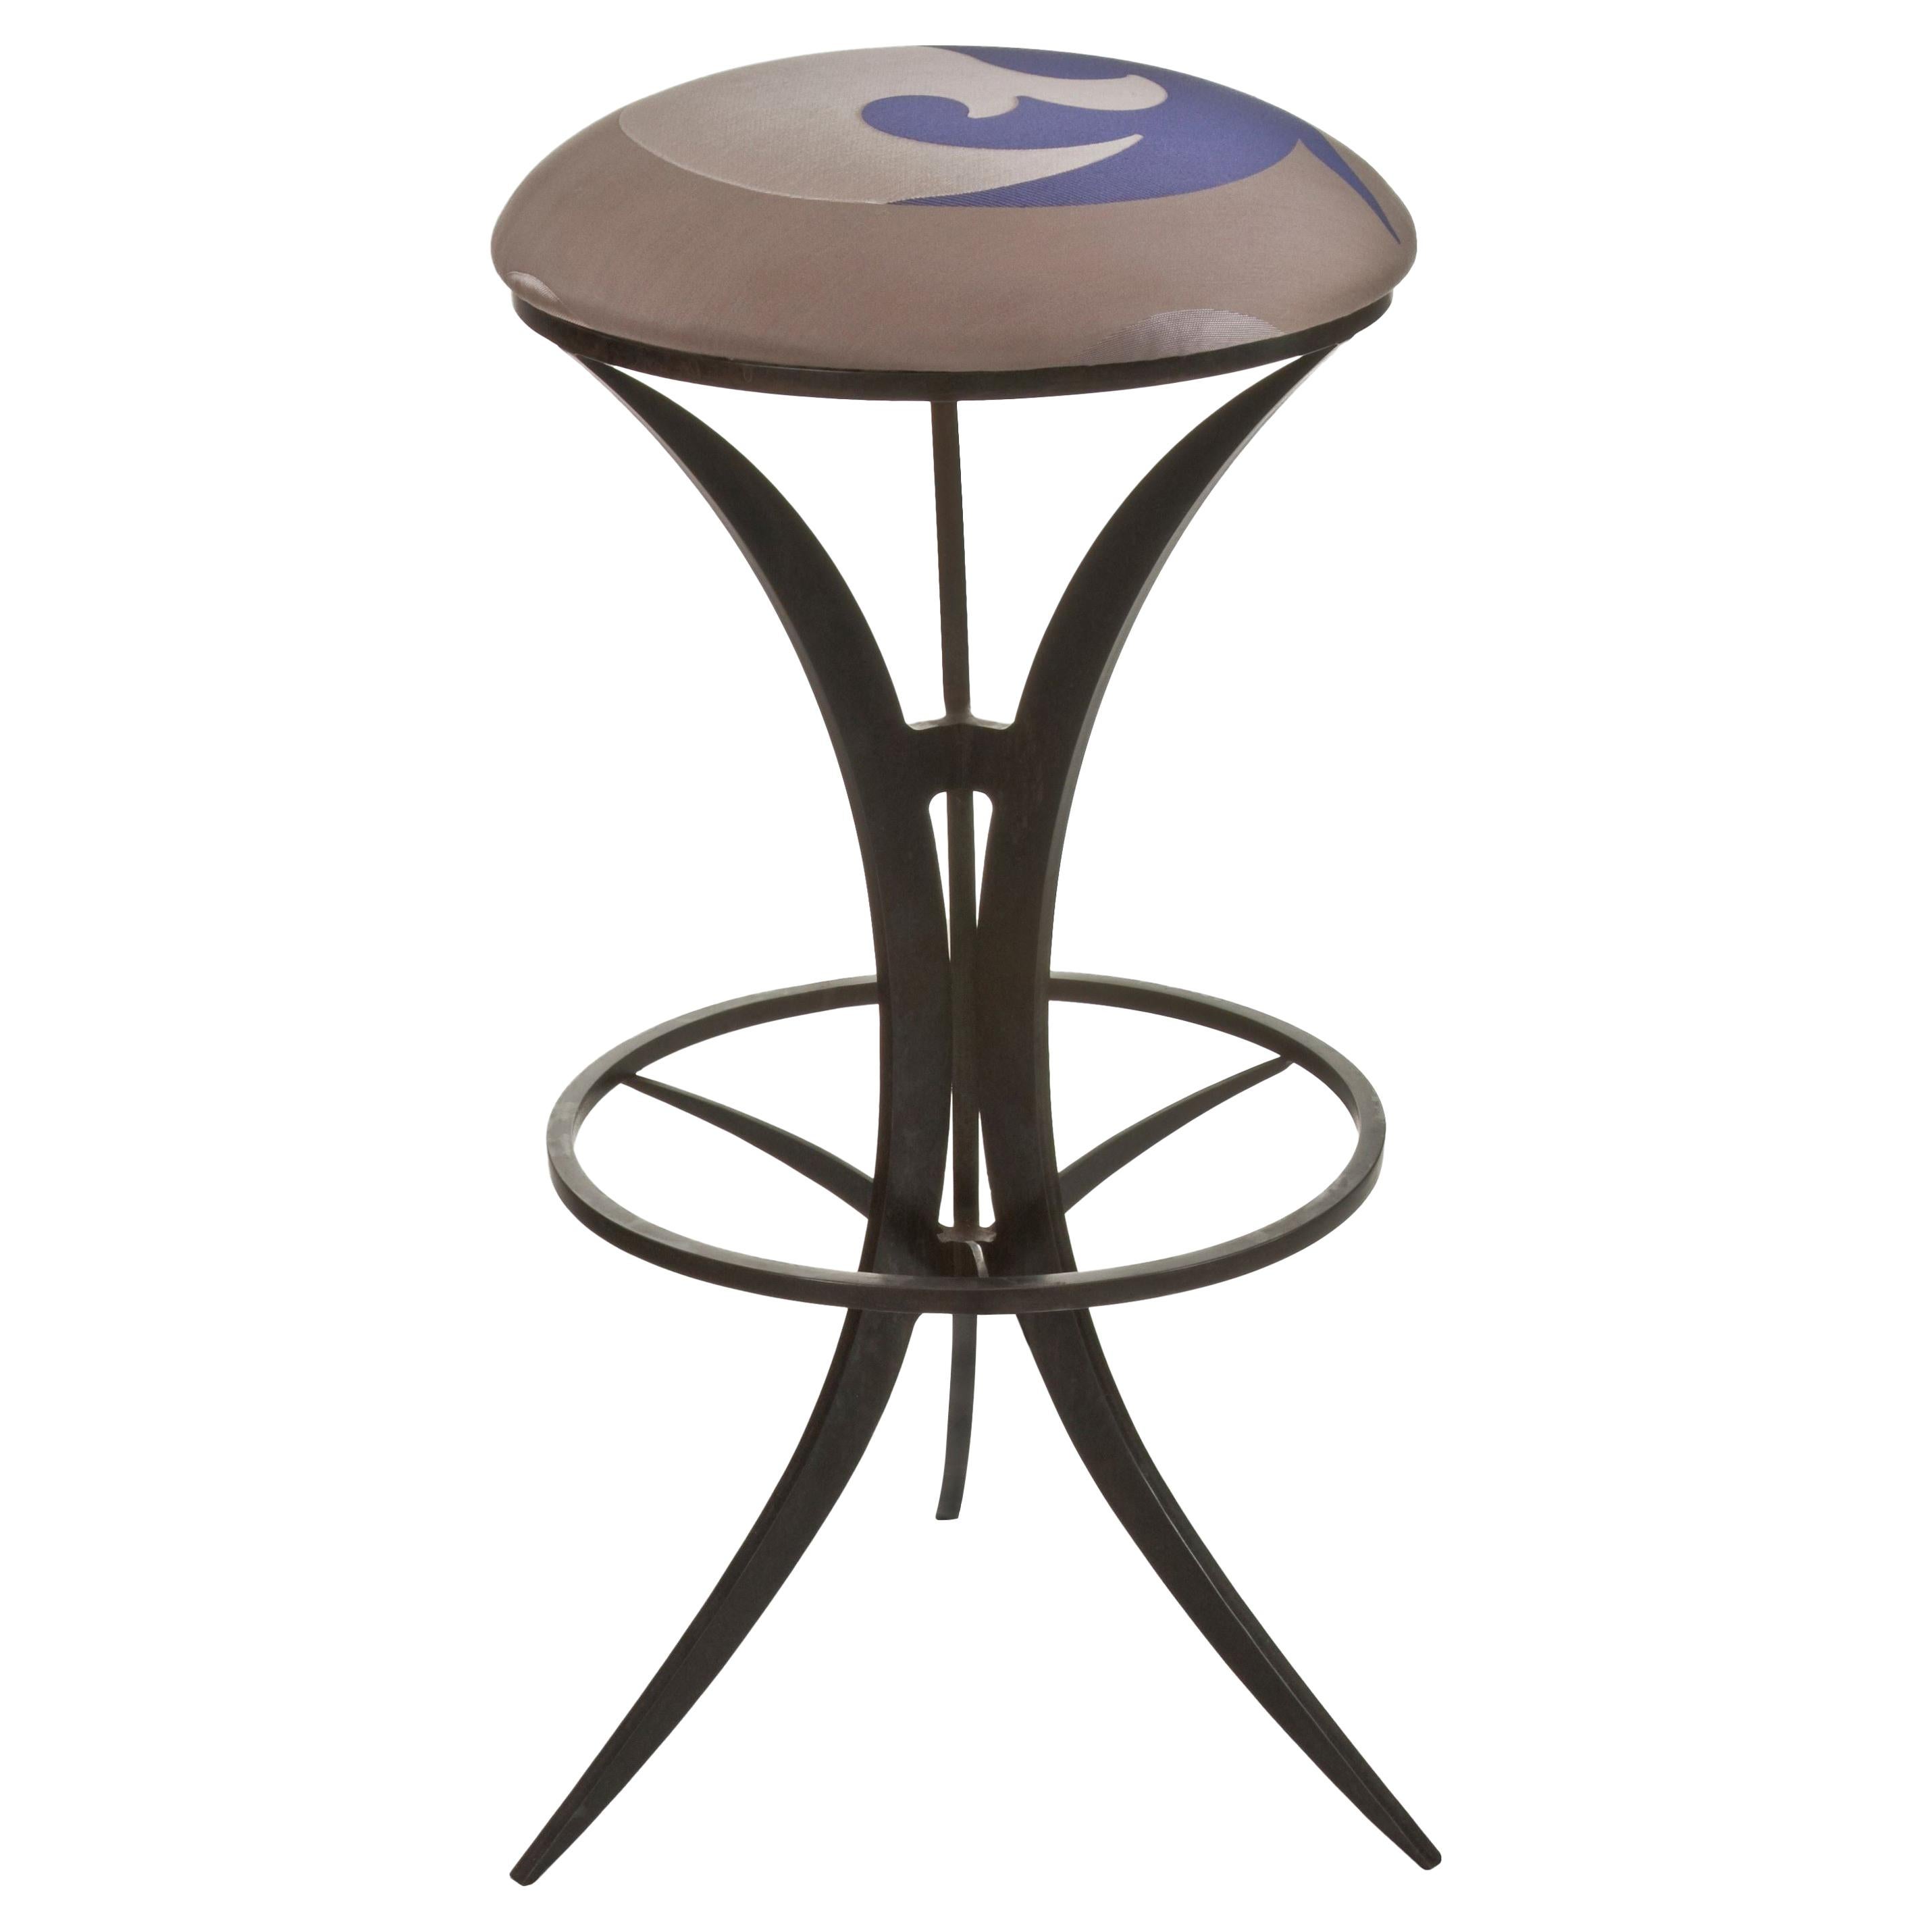 Martini bar stool
In Steel, Stainless or Blackened and customizable with wood, leather or upholstered seats. Features include a sturdy foot rest. 
    